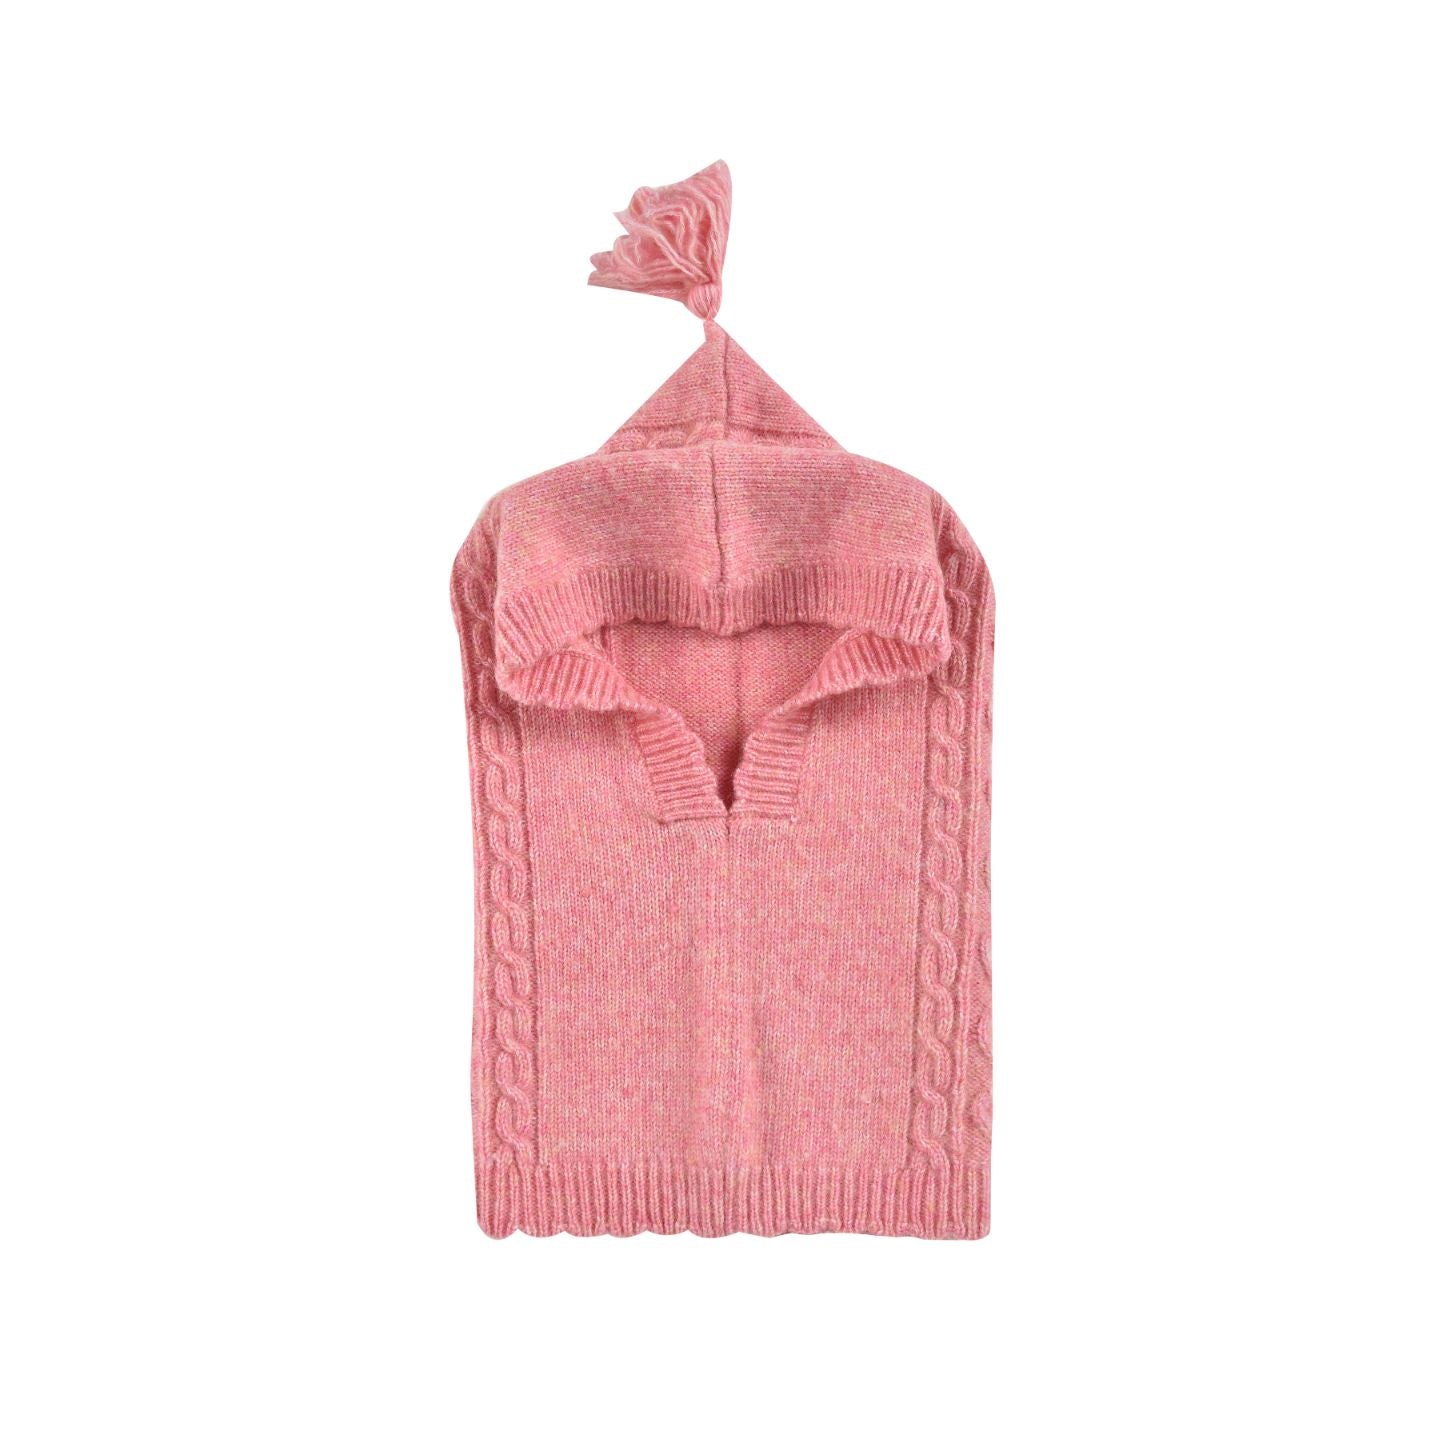 Shop the most comfortable girl's winter hood and hat in pink online in Hong Kong and Singapore at MiliMilu for your winter travels. Wide selection of warm and comfortable kids' clothing and hats, gloves and mittens online. The best and most thoughtful baby and kids gifts for birthdays and Christmas.